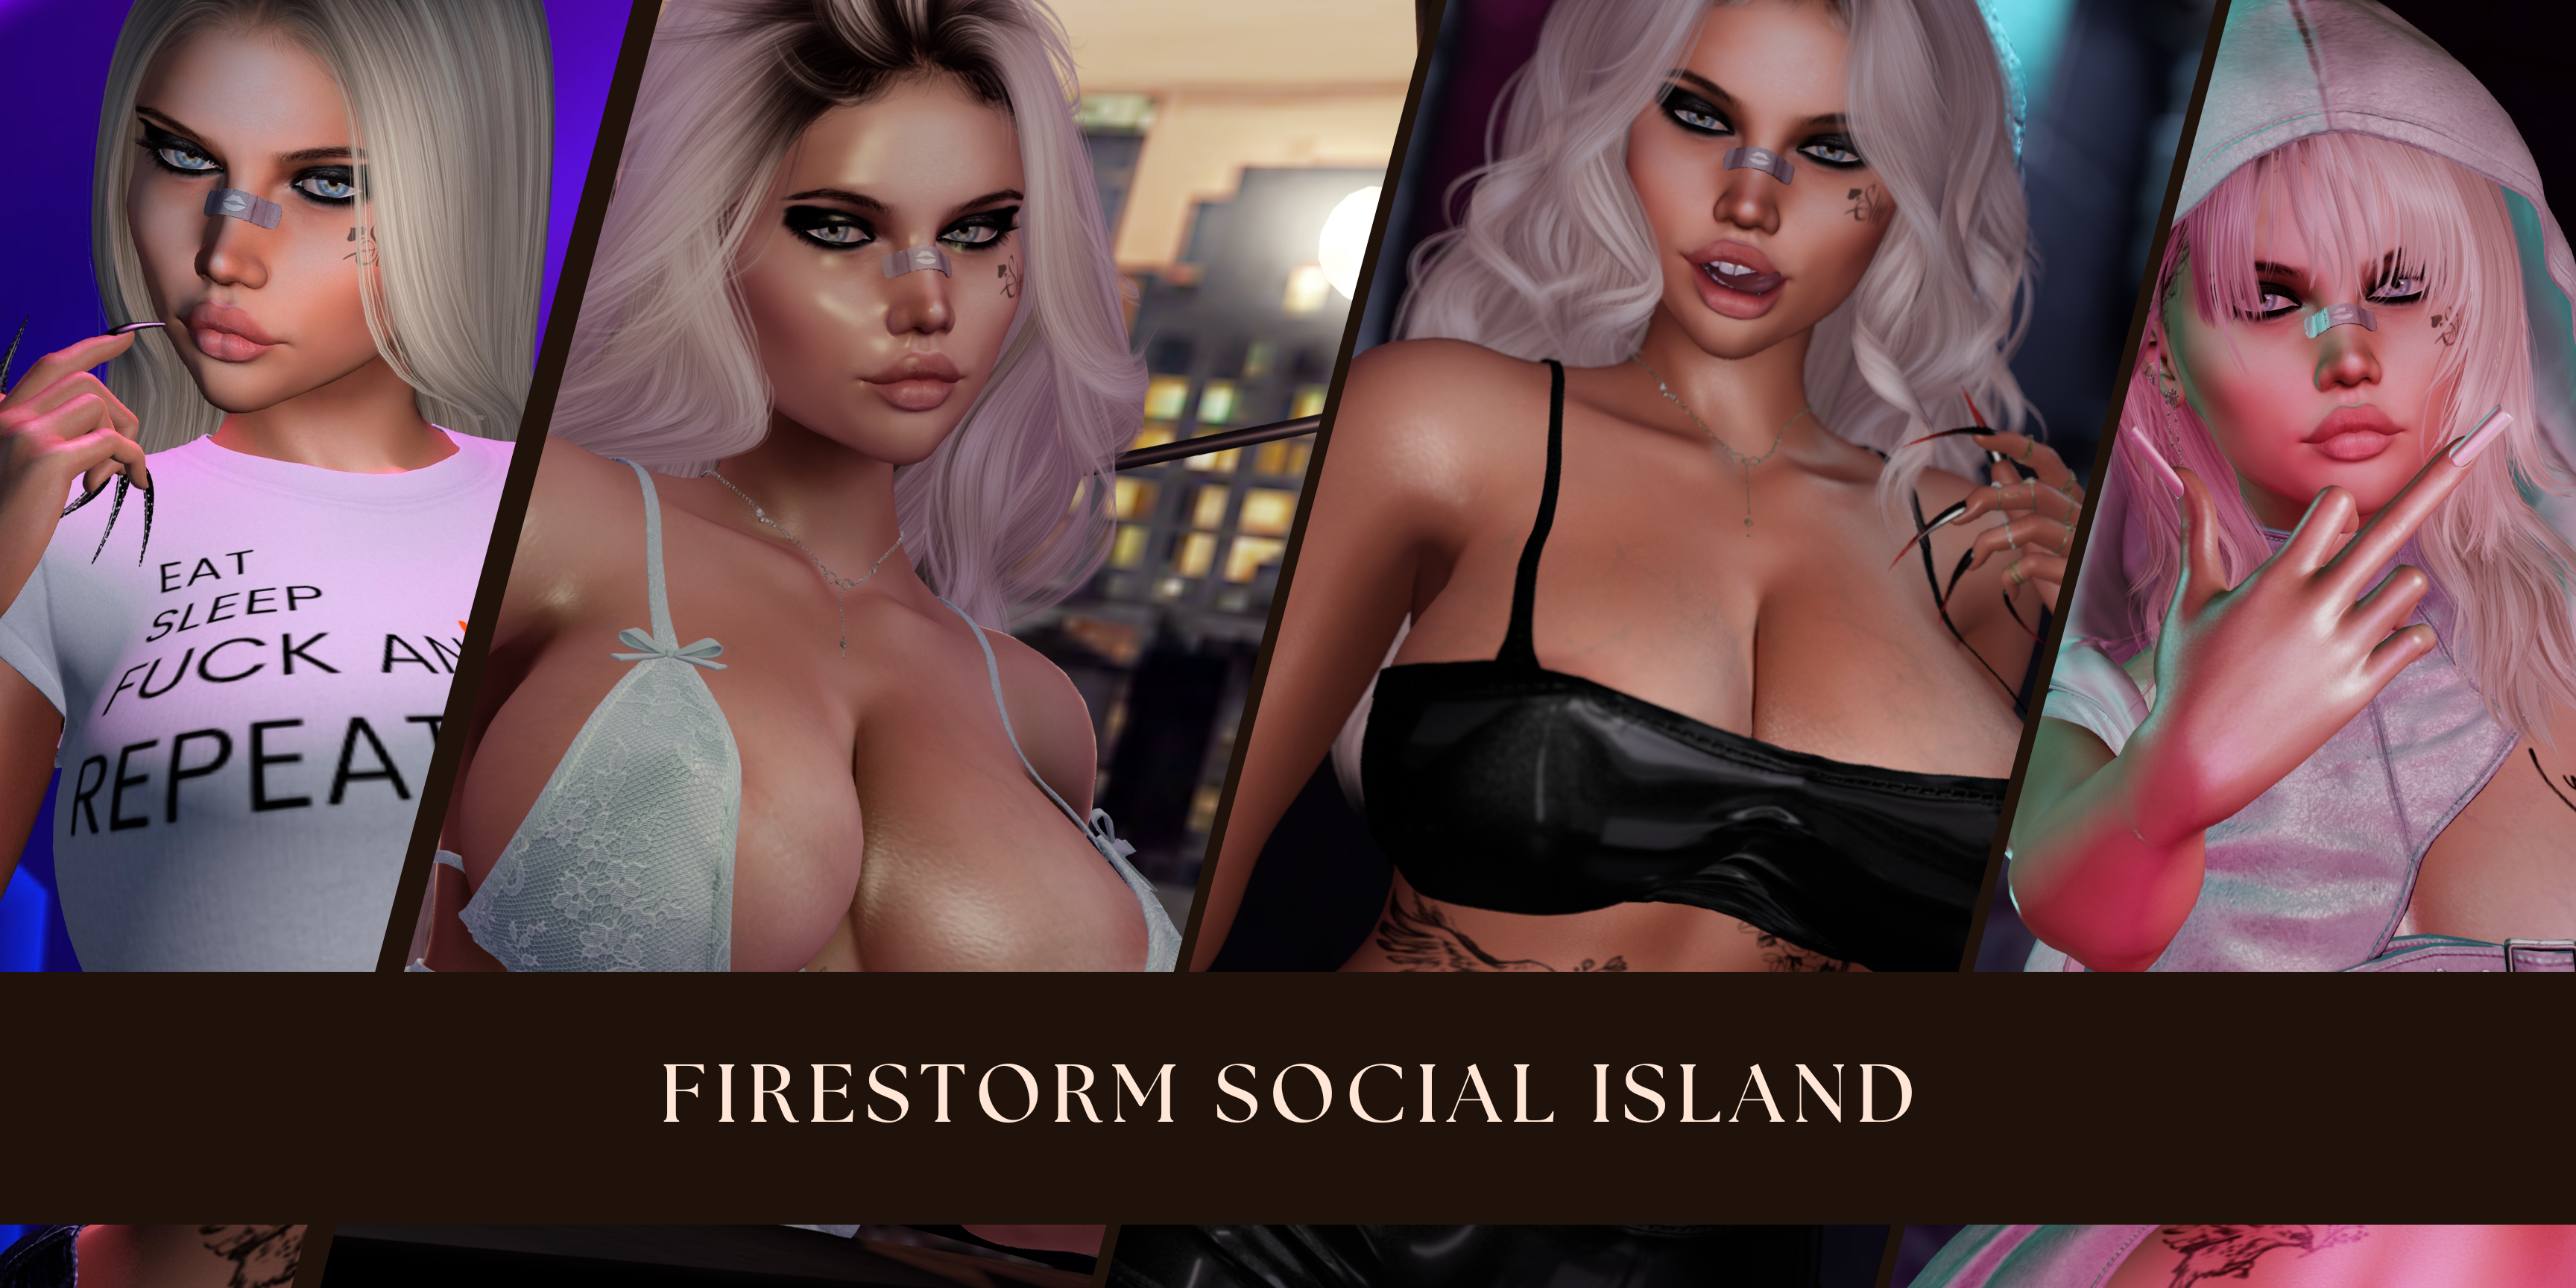 What is the Firestorm Social Island?